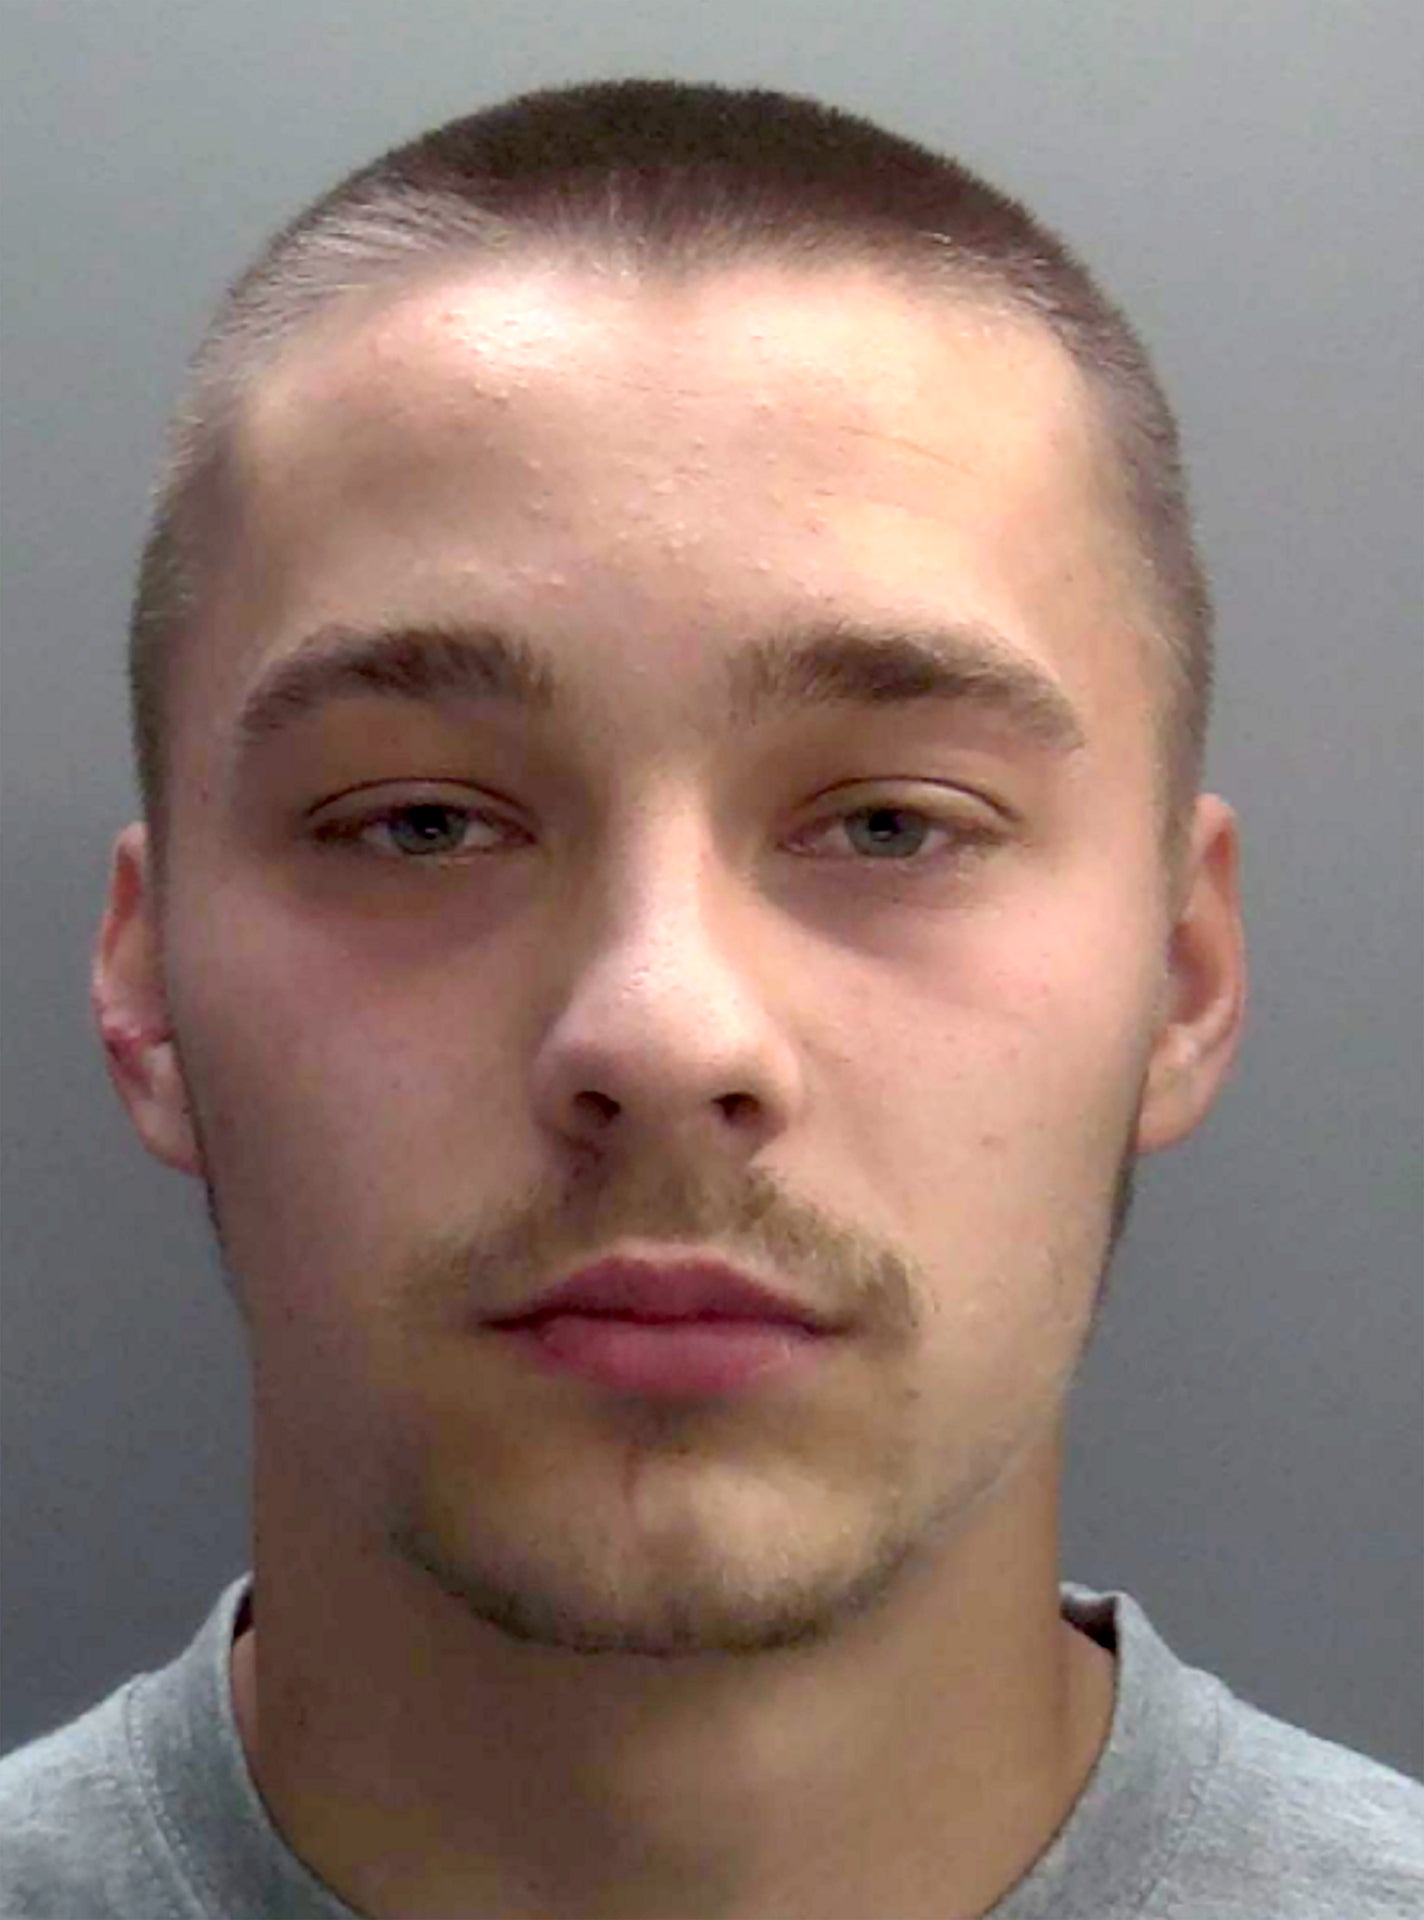 Undated handout photo issued by Leicestershire Police of Chay Bowskill, 20, of Empingham Drive, Syston, Leicestershire, who was convicted of kidnap, coercive and controlling behaviour, and perverting the course of justice following a trial at Leicester Crown Court